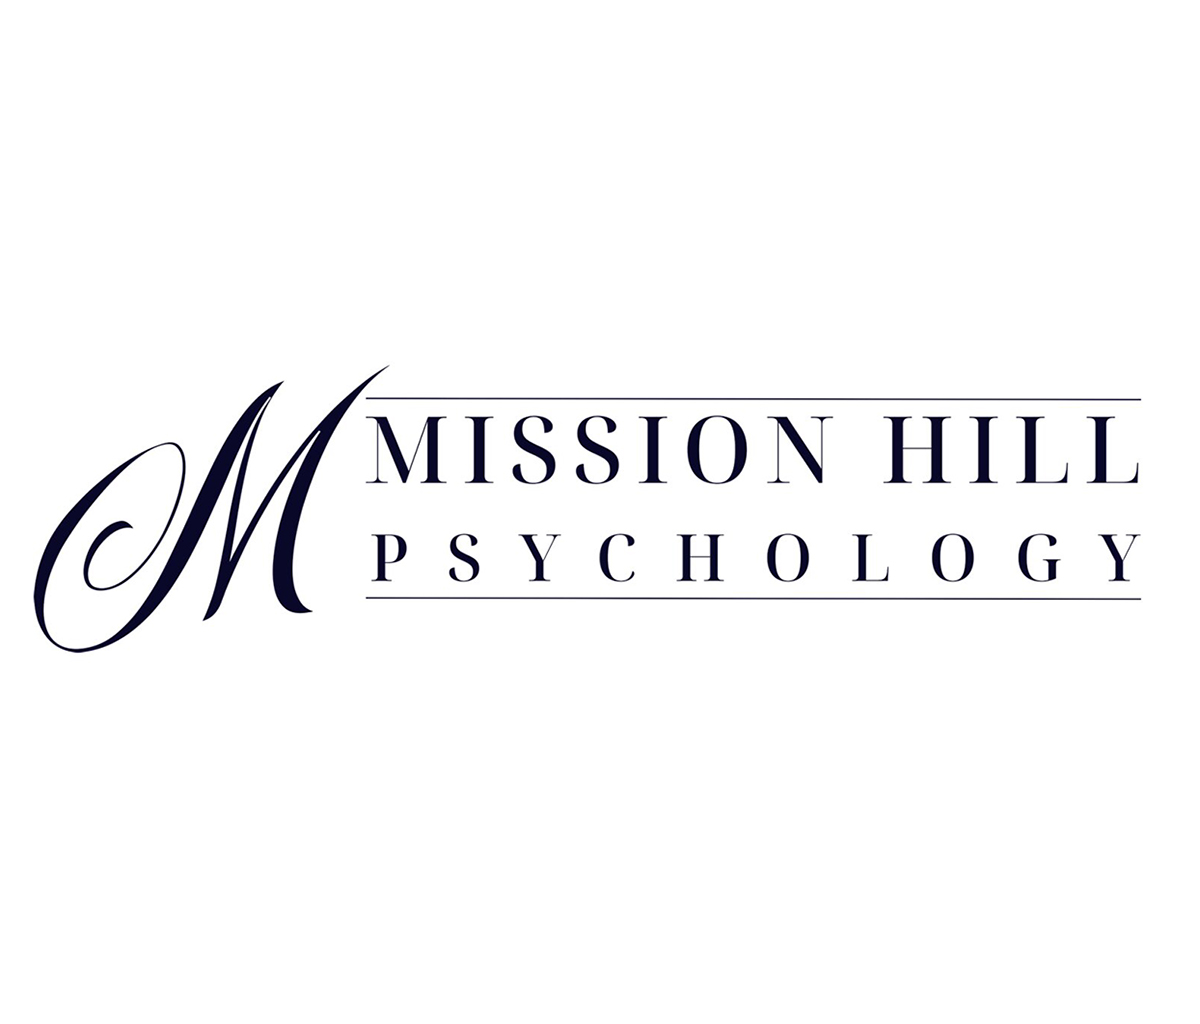 Best Burnout Treatment and Mental Health Care | Mission Hill